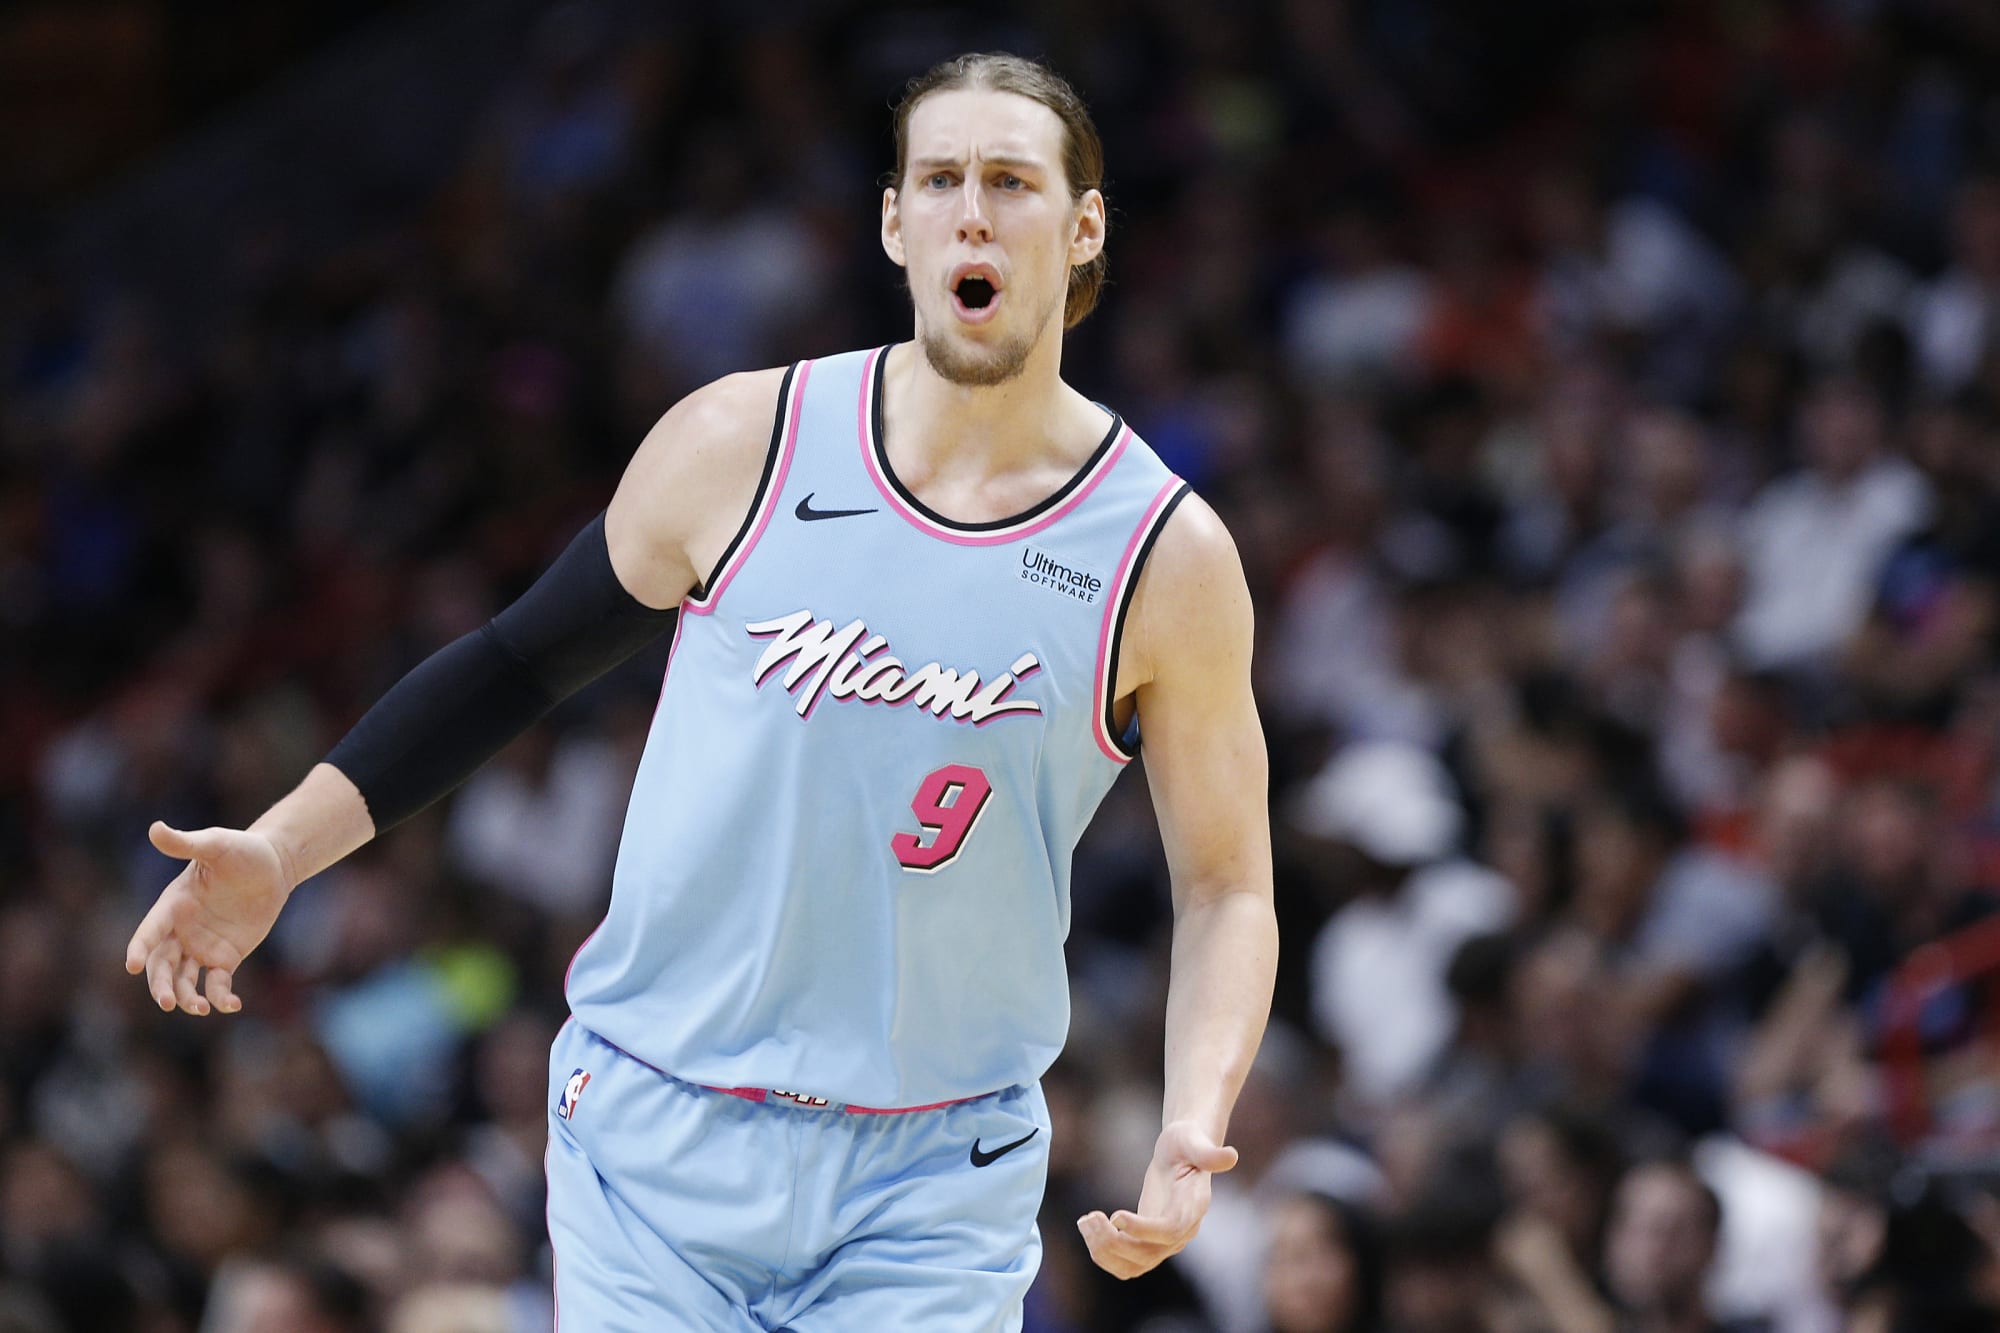 Miami Heat: 3 reasons why Kelly Olynyk is probably the right starter